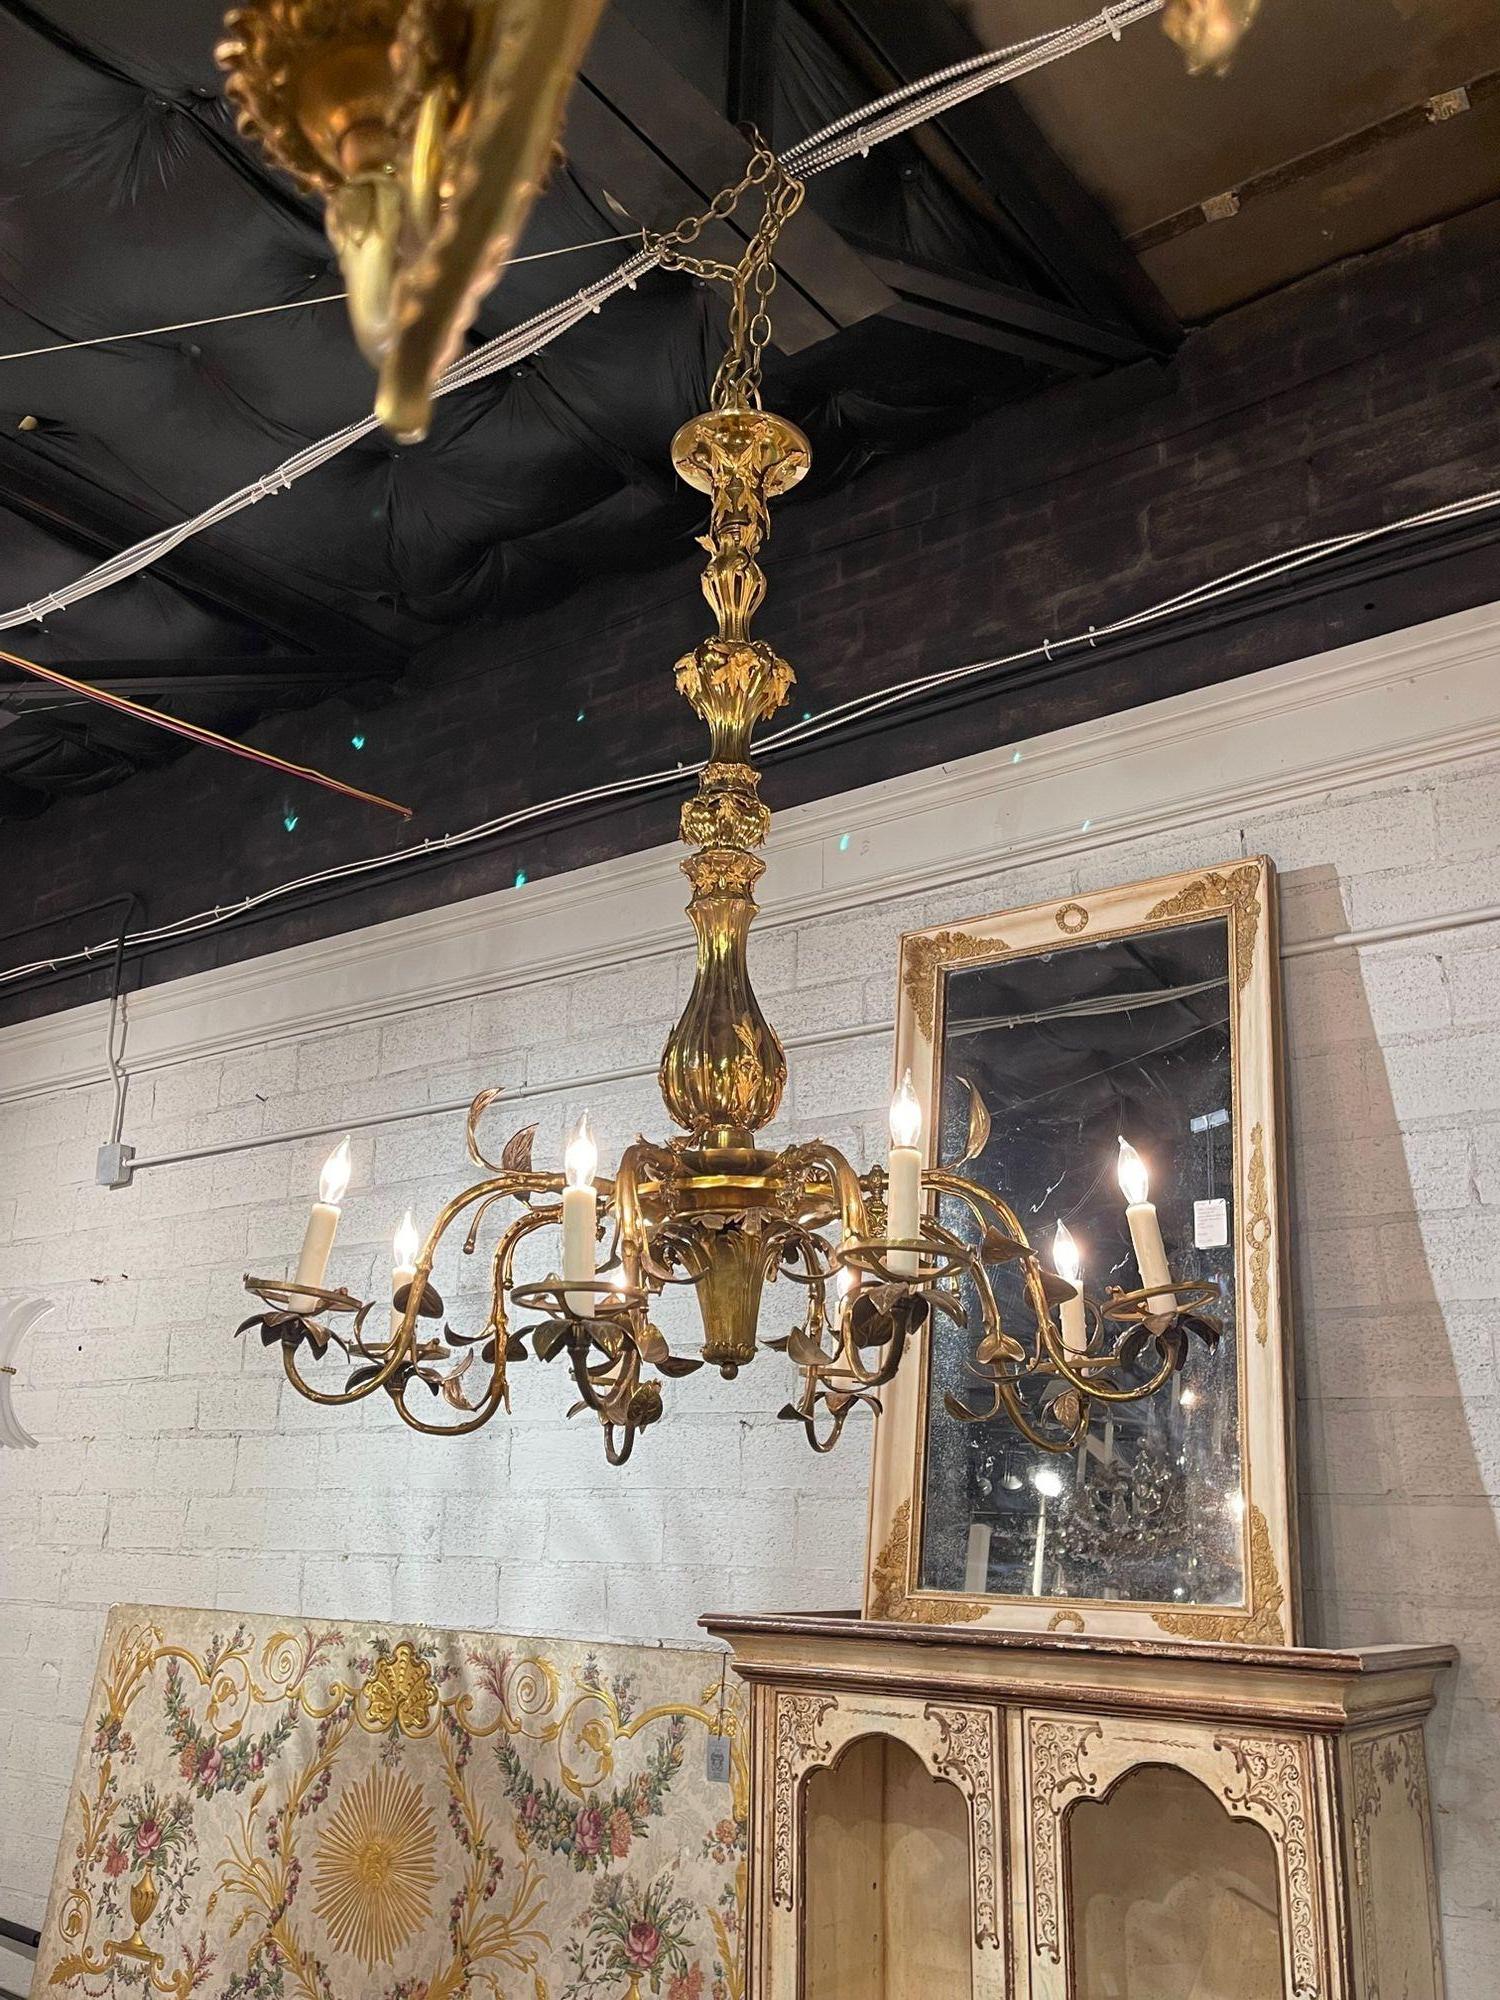 Elegant 19th century Italian gilt bronze 8 light chandelier. Beautiful details on the arms and base. A great addition for a designer look!